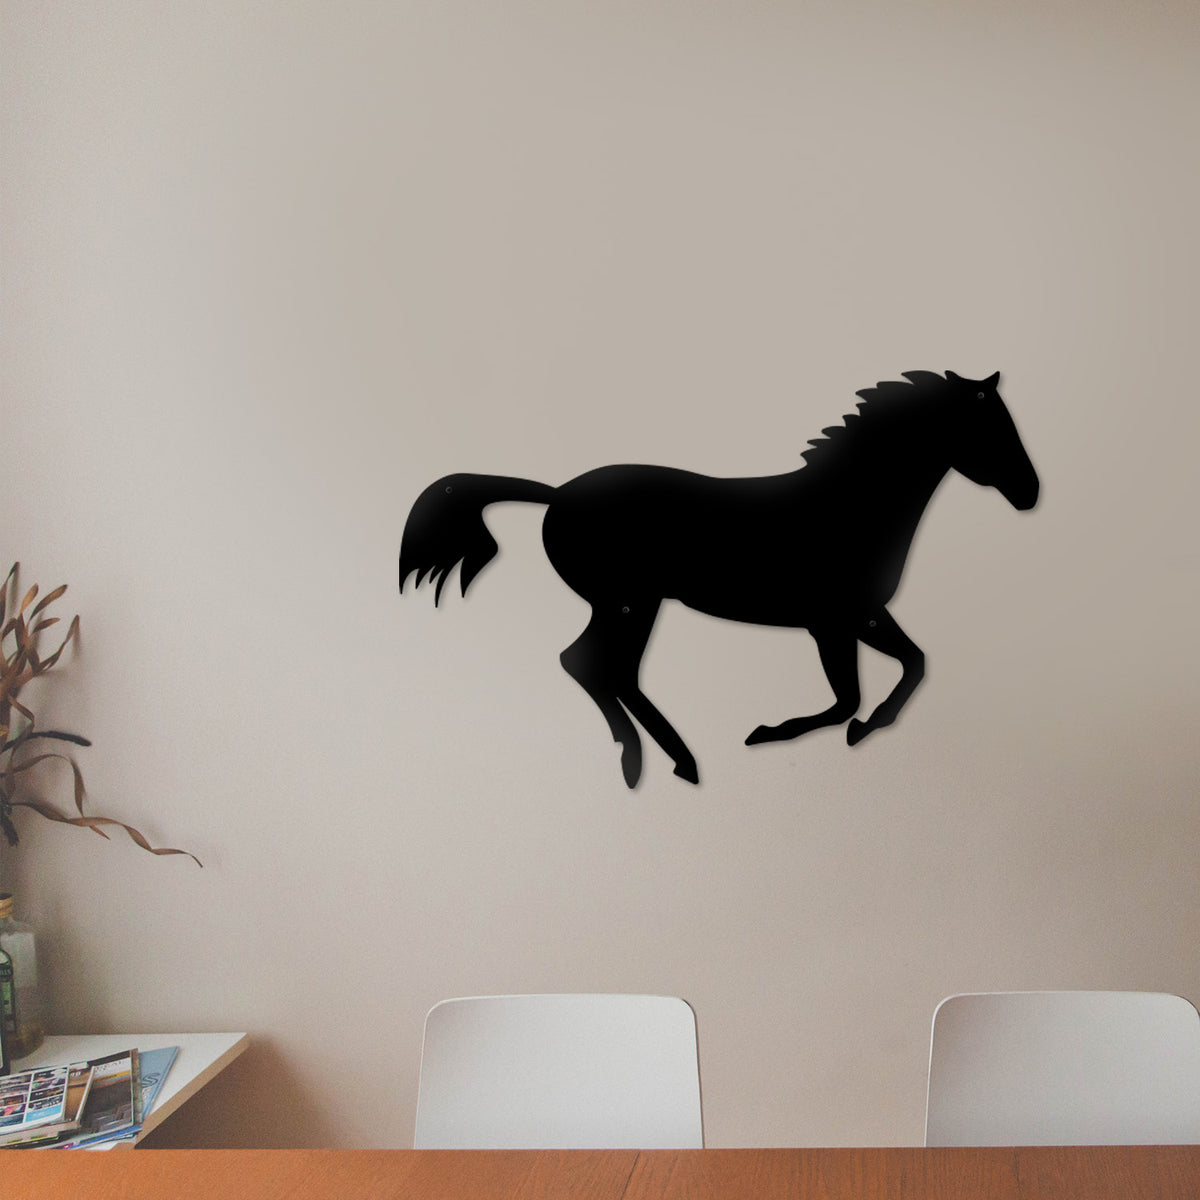 Horse Wall Art in Living Room Setting